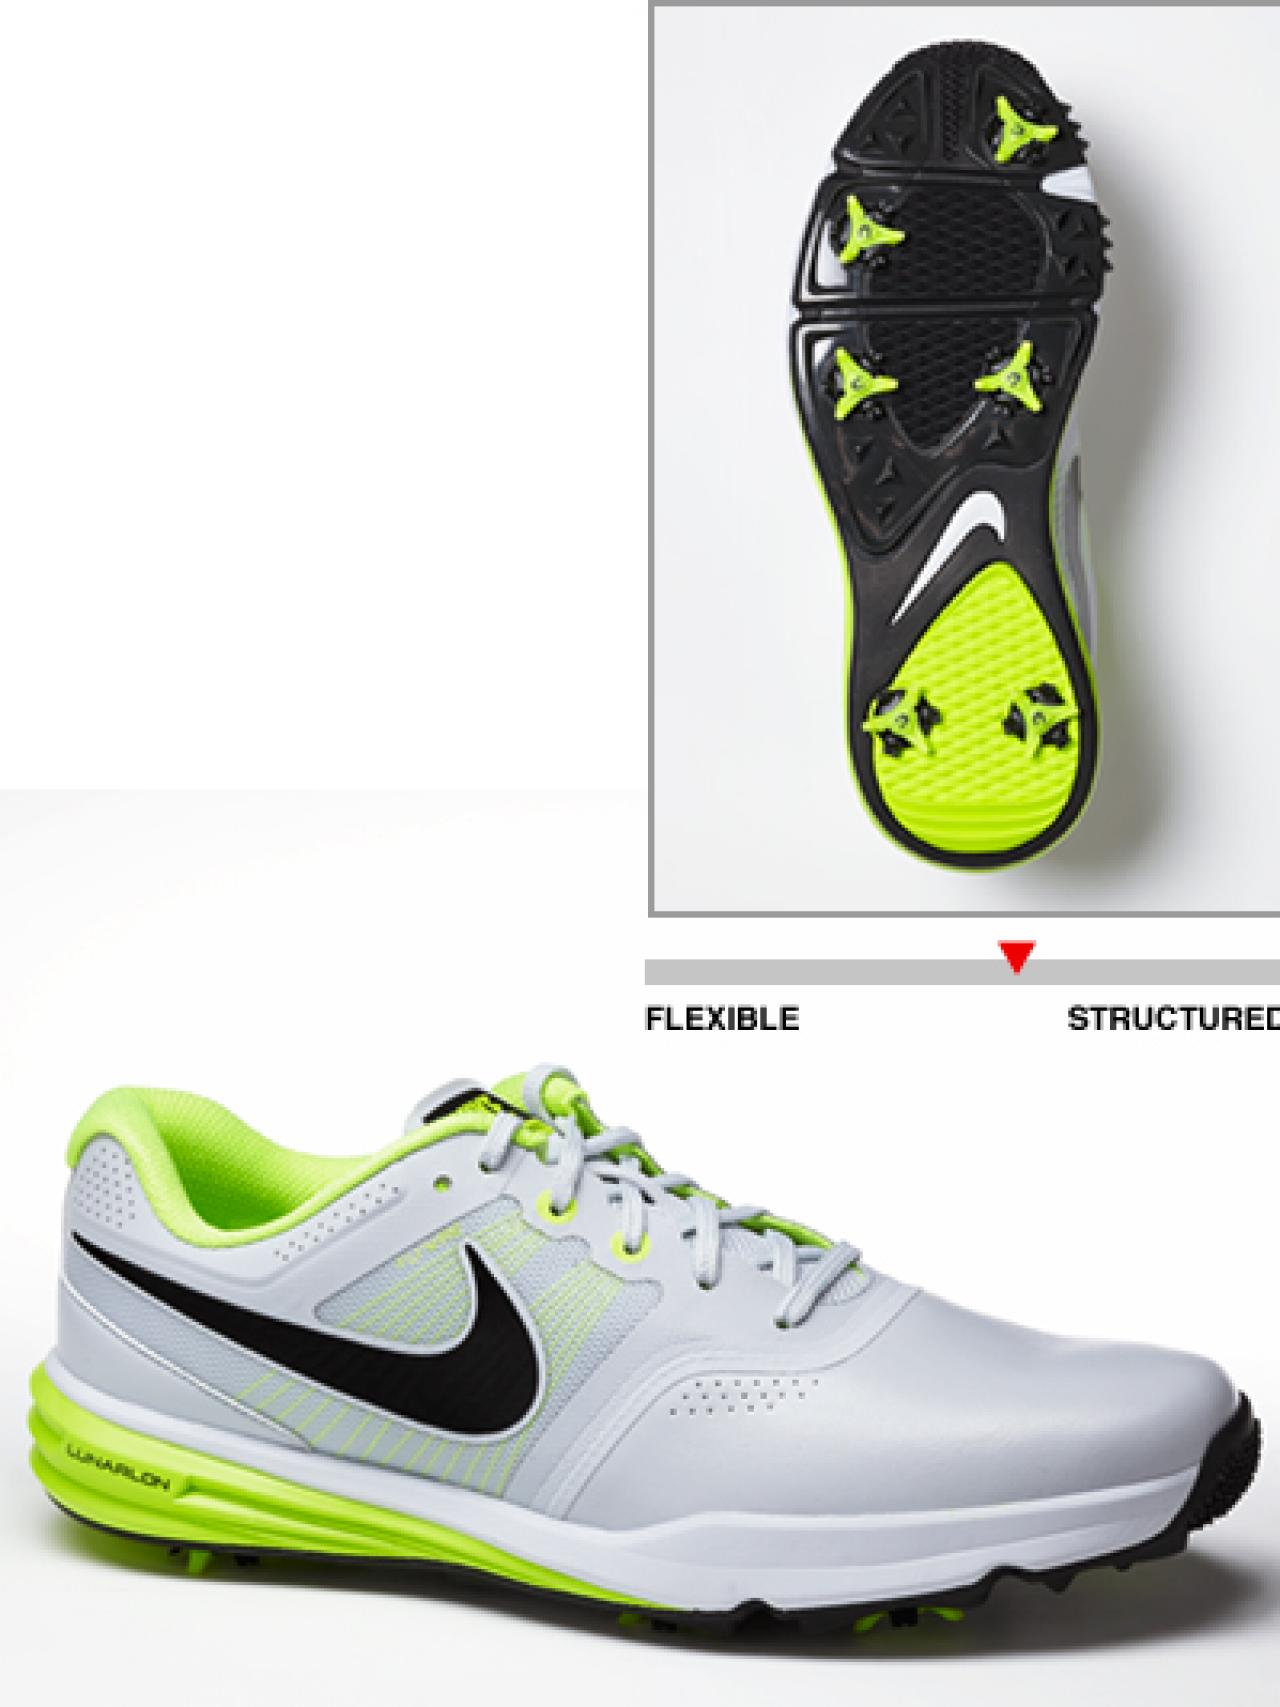 2015 Shoe Guide: Gaining Traction | Golf Equipment: Balls, | Digest